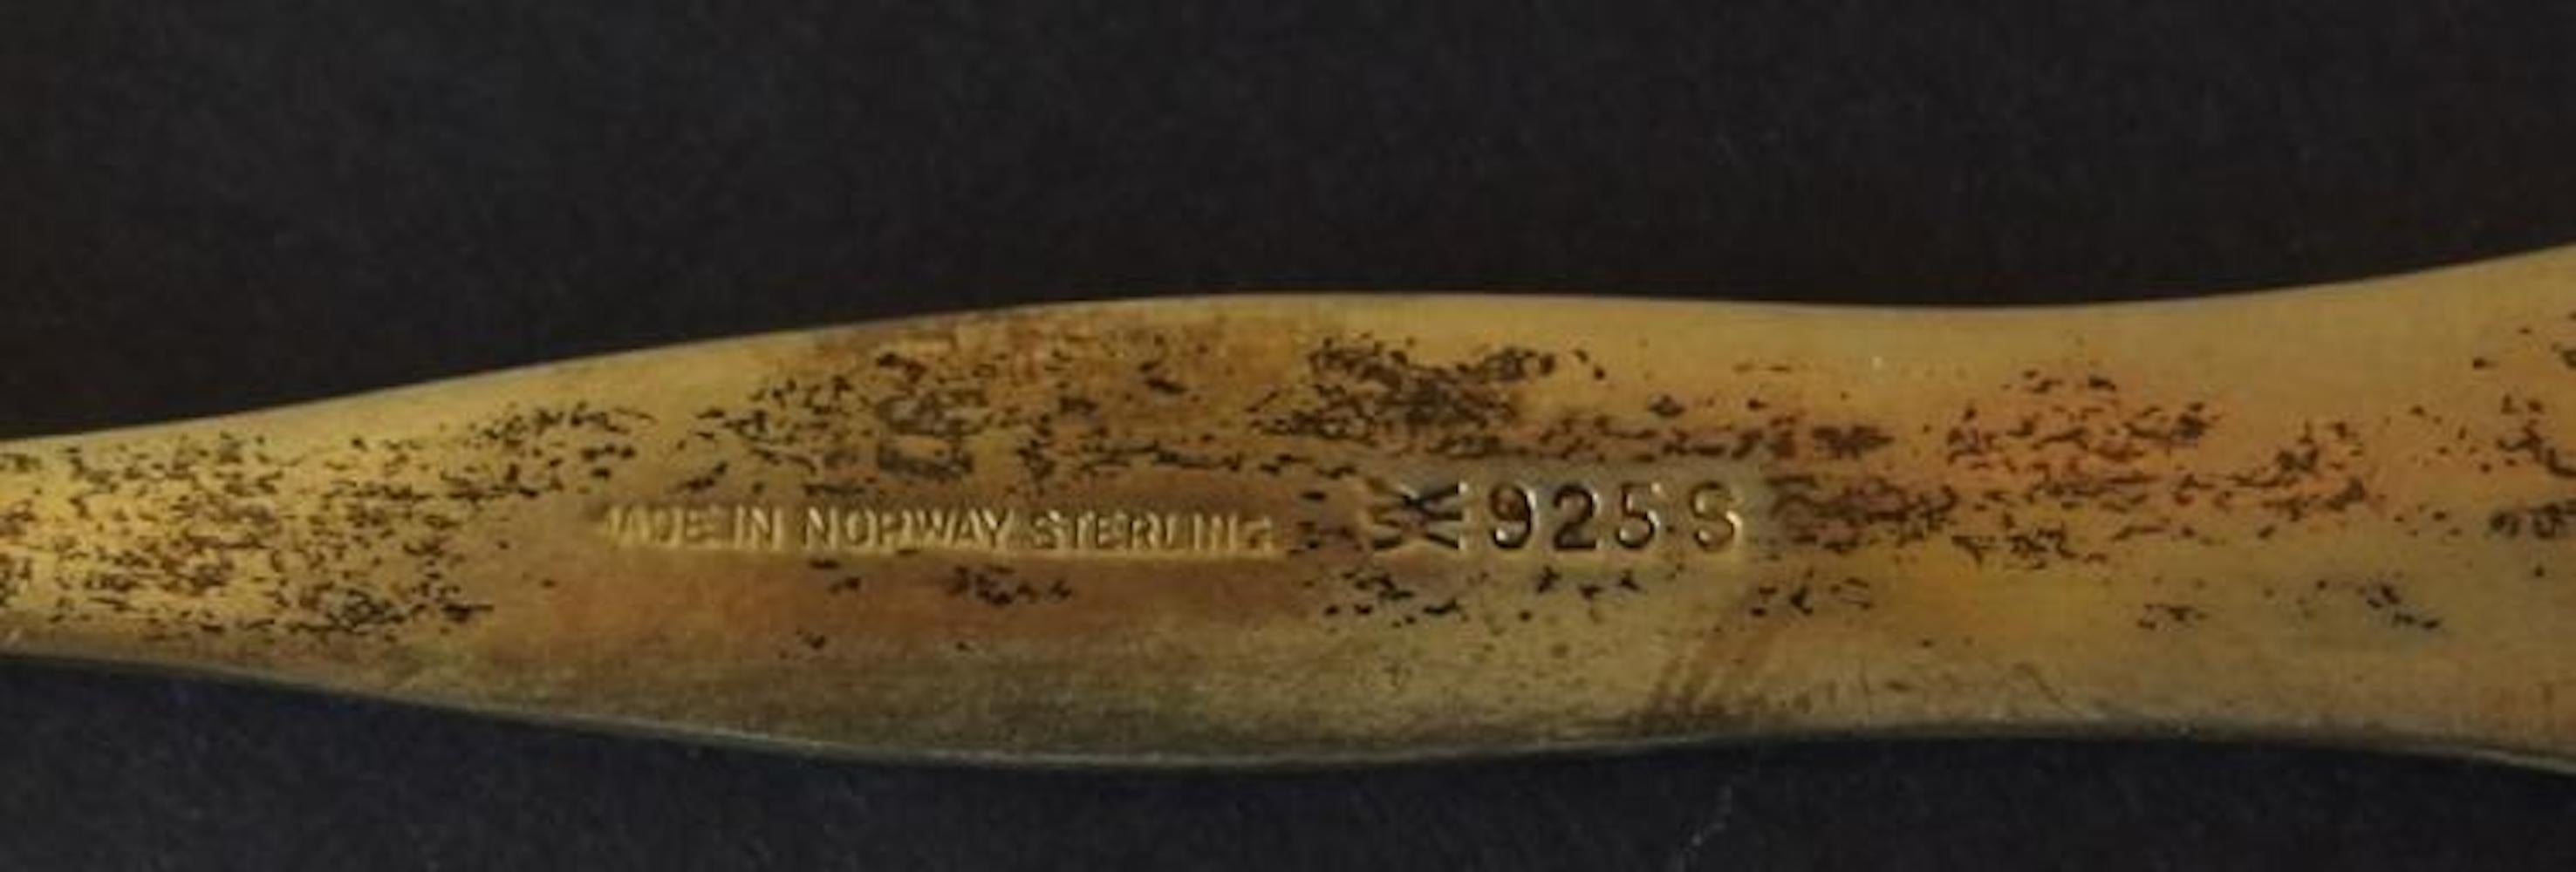 Set of six Norwegian gilt sterling silver guilloche demitasse spoons. Each marked 'Made in Norway 925 S' along with makers mark,. Comes with Magnus Aase box TW 67.9 grams Size: Each 4